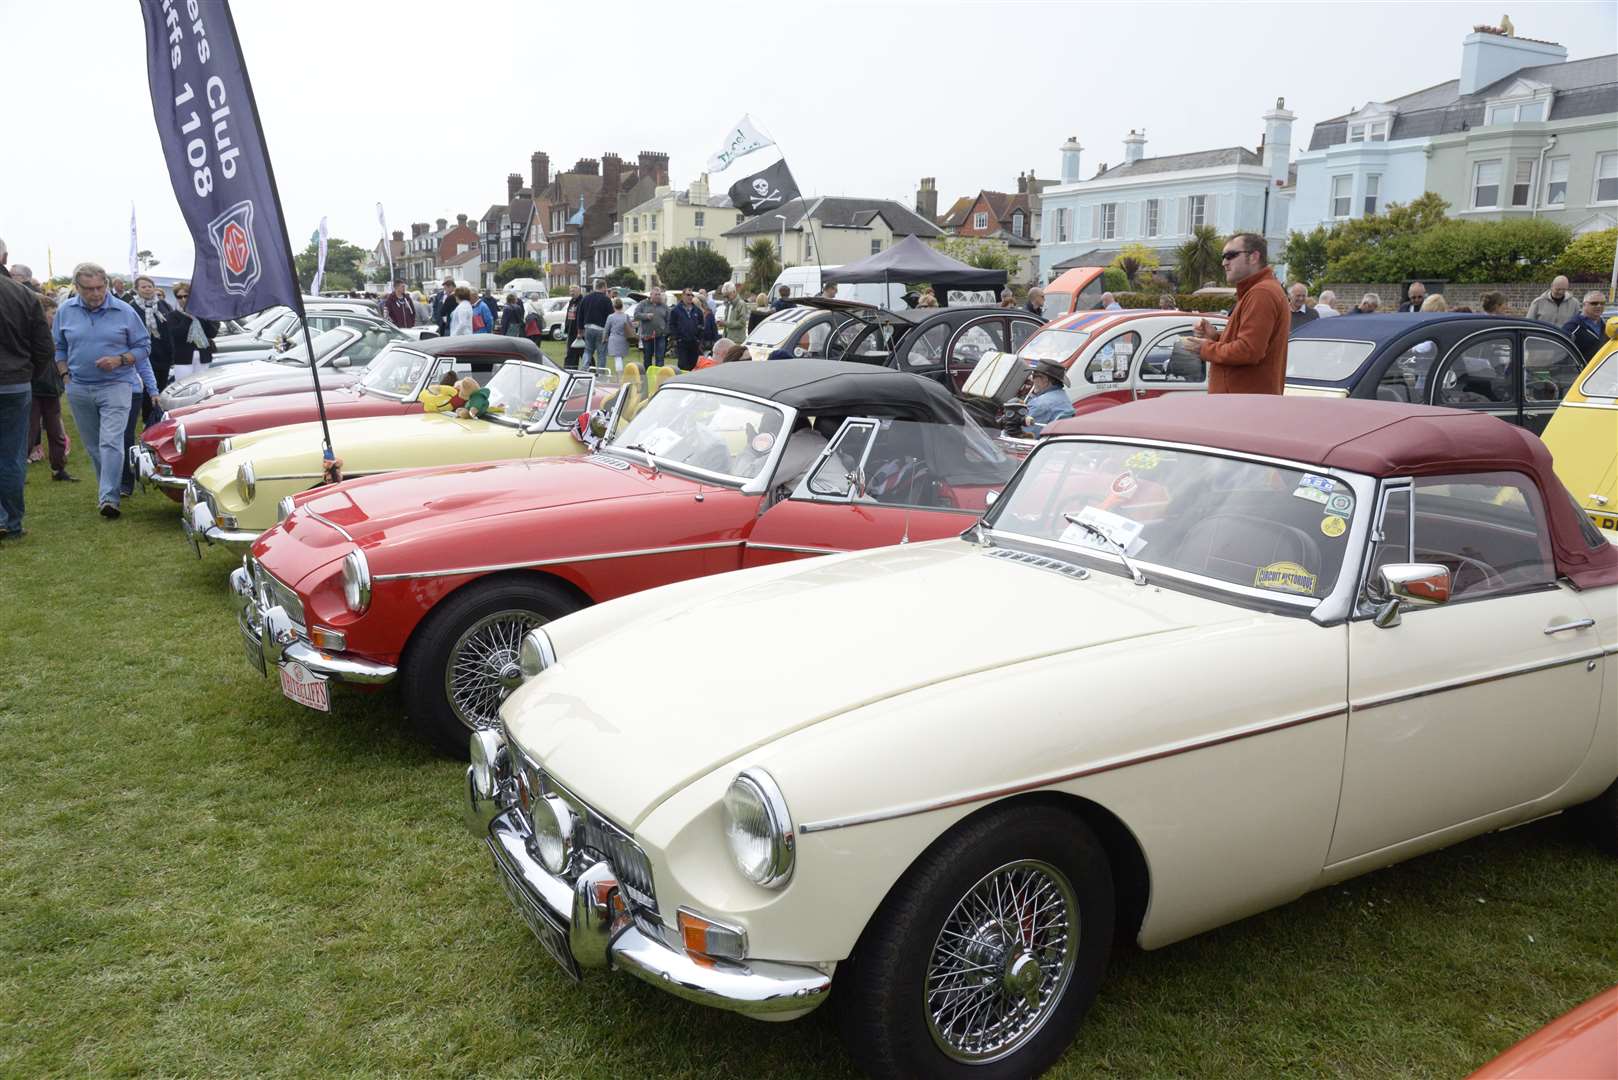 MG's on display during the Deal Classic Motor Show in a previous year